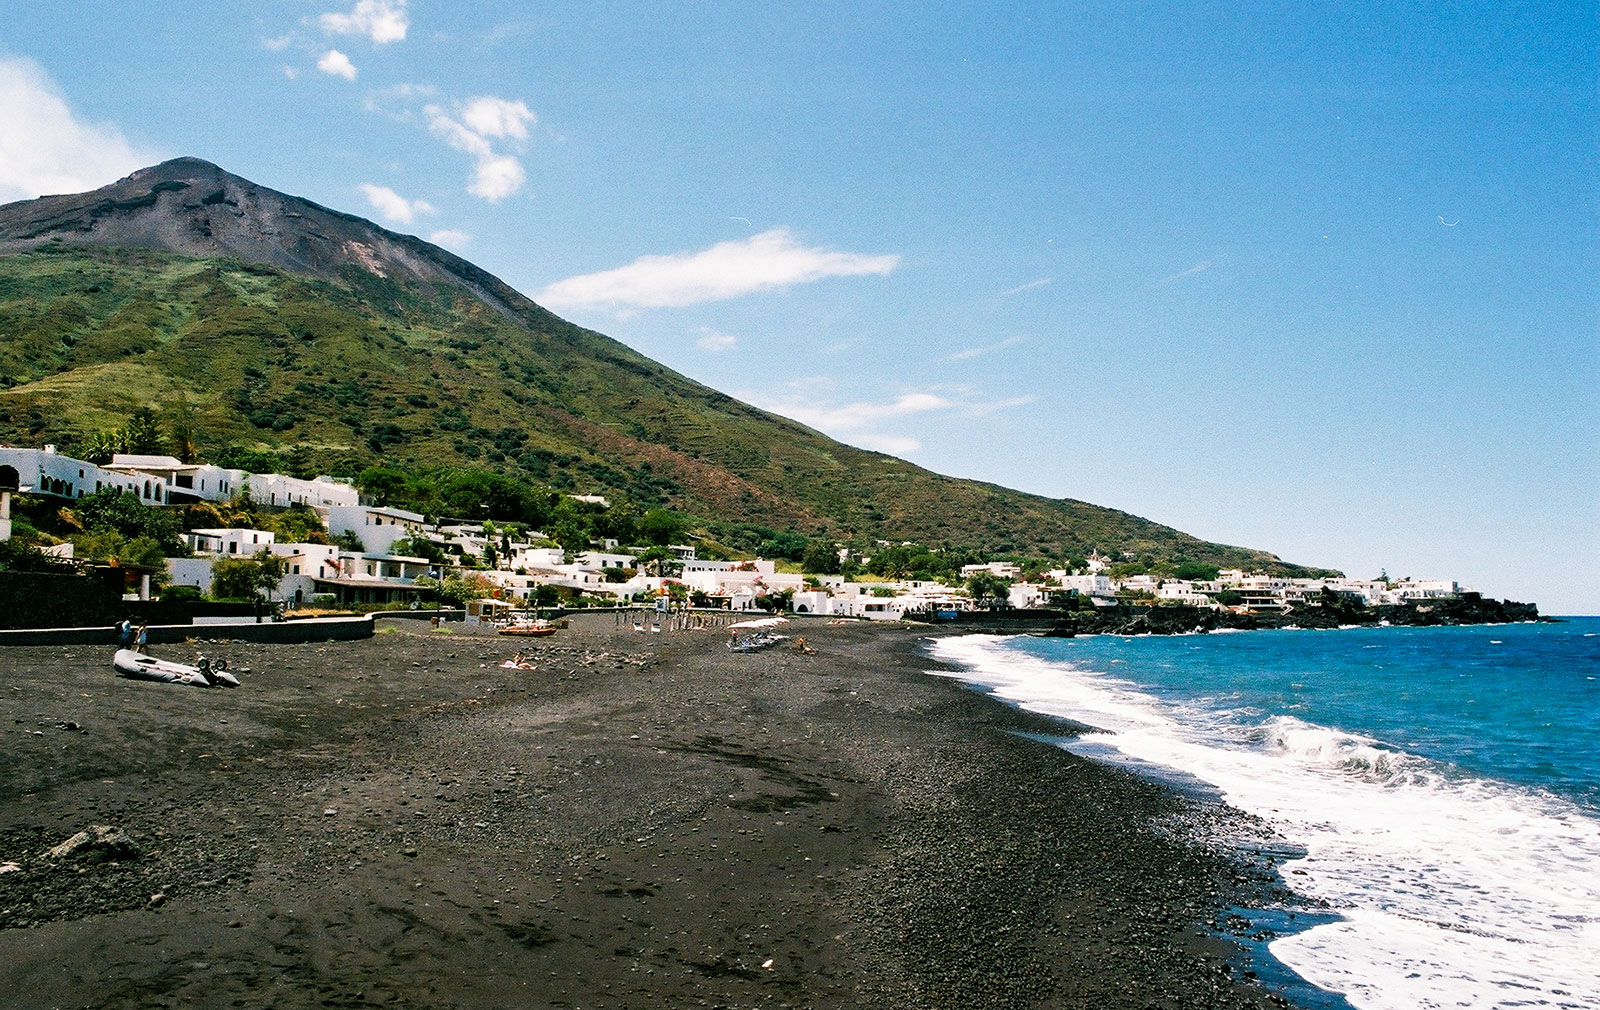 Black volcanic sands line the beach at the small beachfront village of Ficogrande on Stromboli